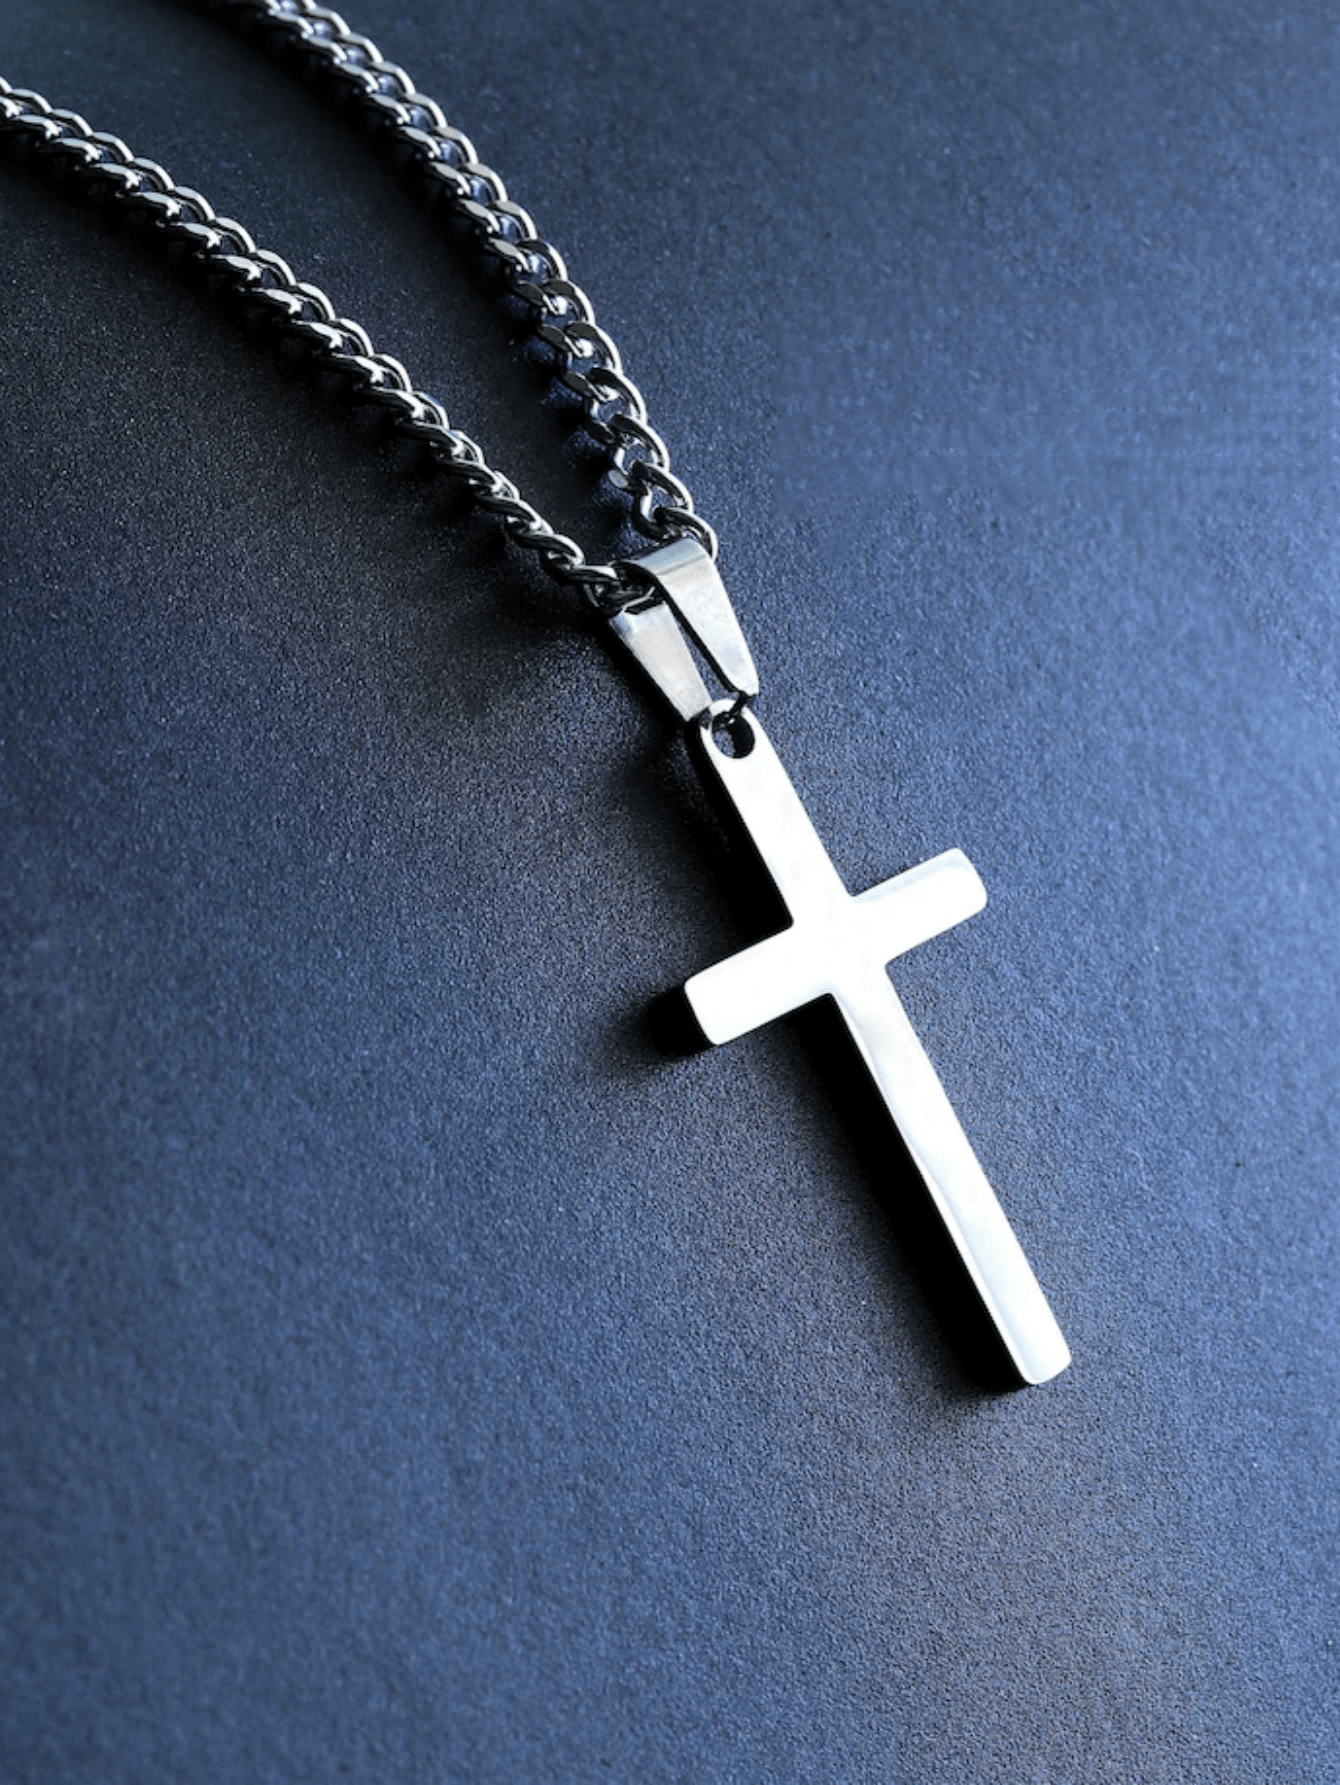 1pc Stylish Cross Pendant Thin Chain Men'S Necklace, Waterproof And Fadeless, Ideal For Daily And Festive Parties